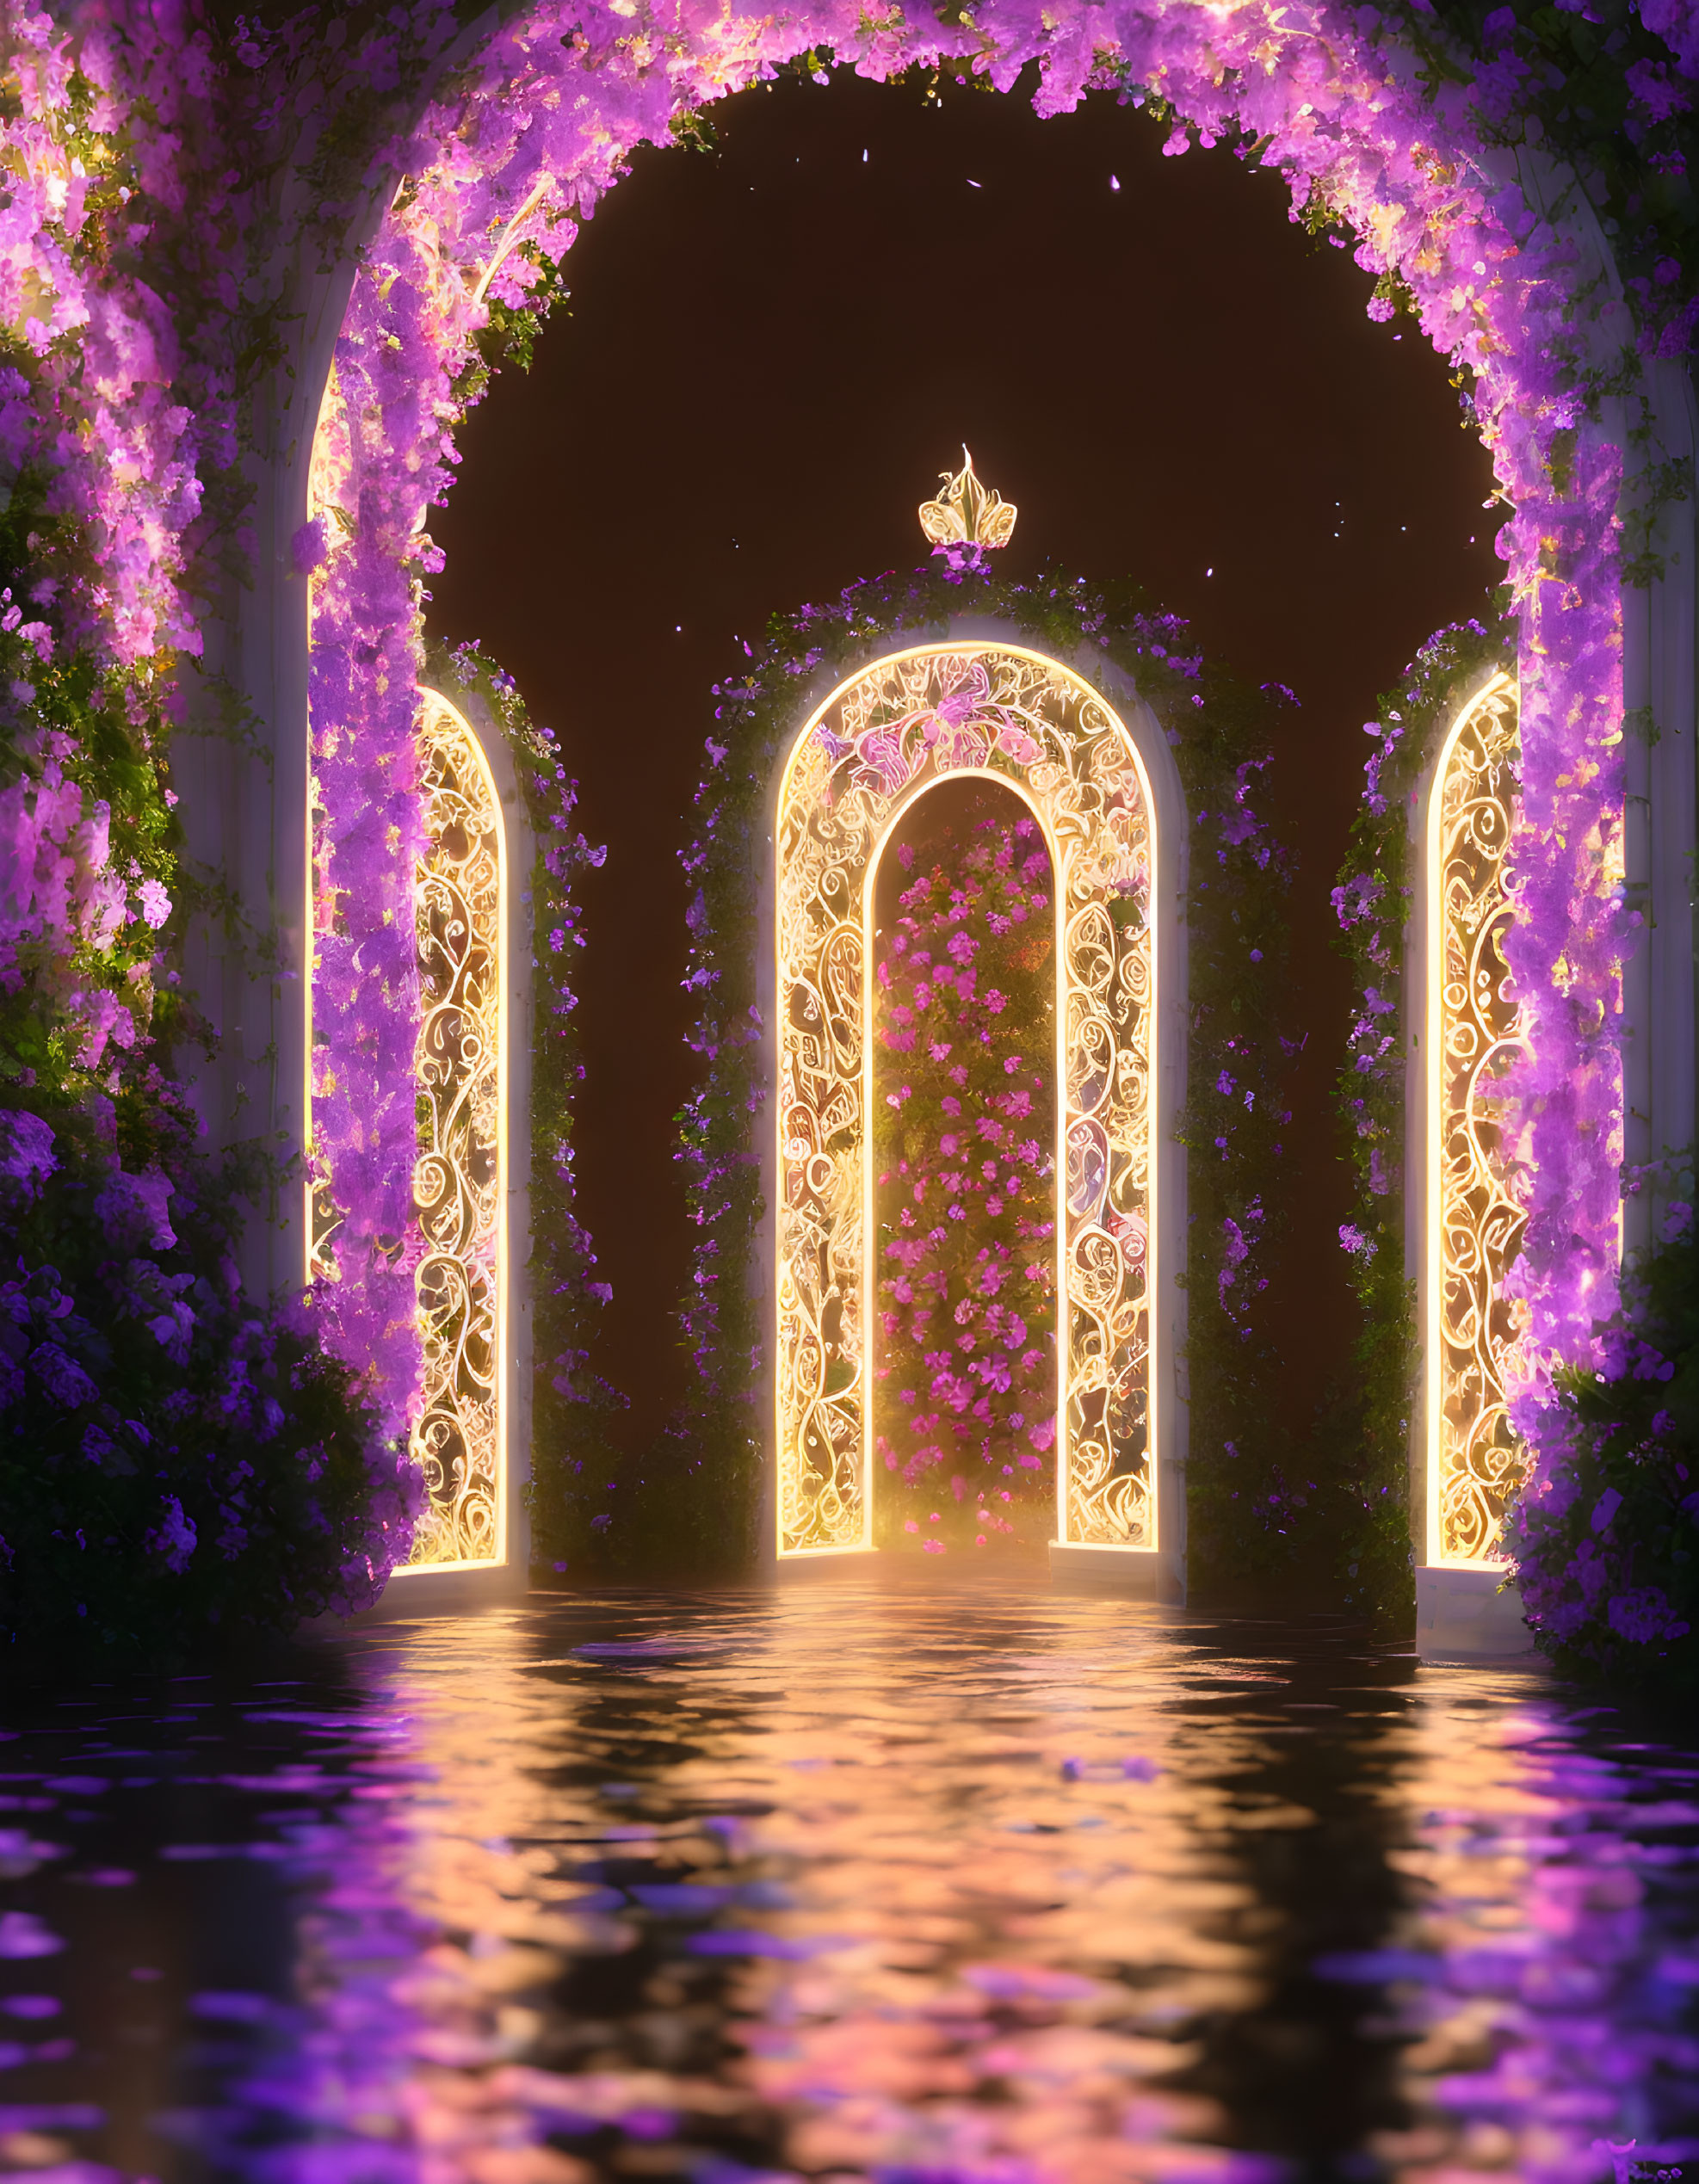 Enchanting pathway with illuminated arches and purple flowers leading to ornate gate